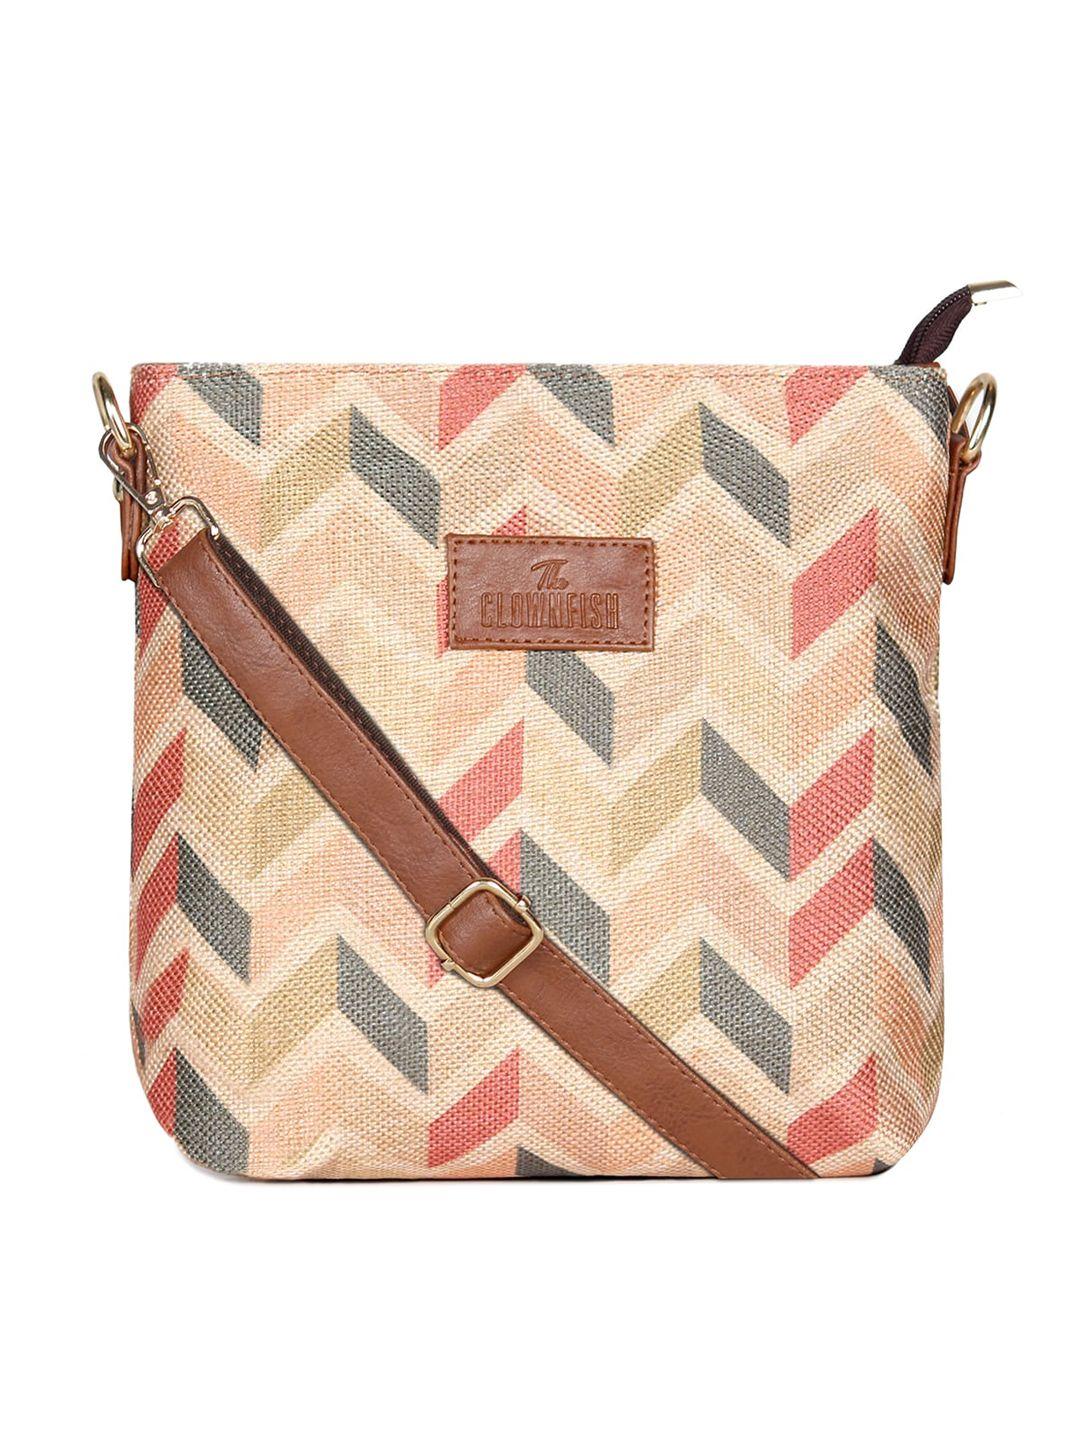 the clownfish cream-coloured geometric structured sling bag